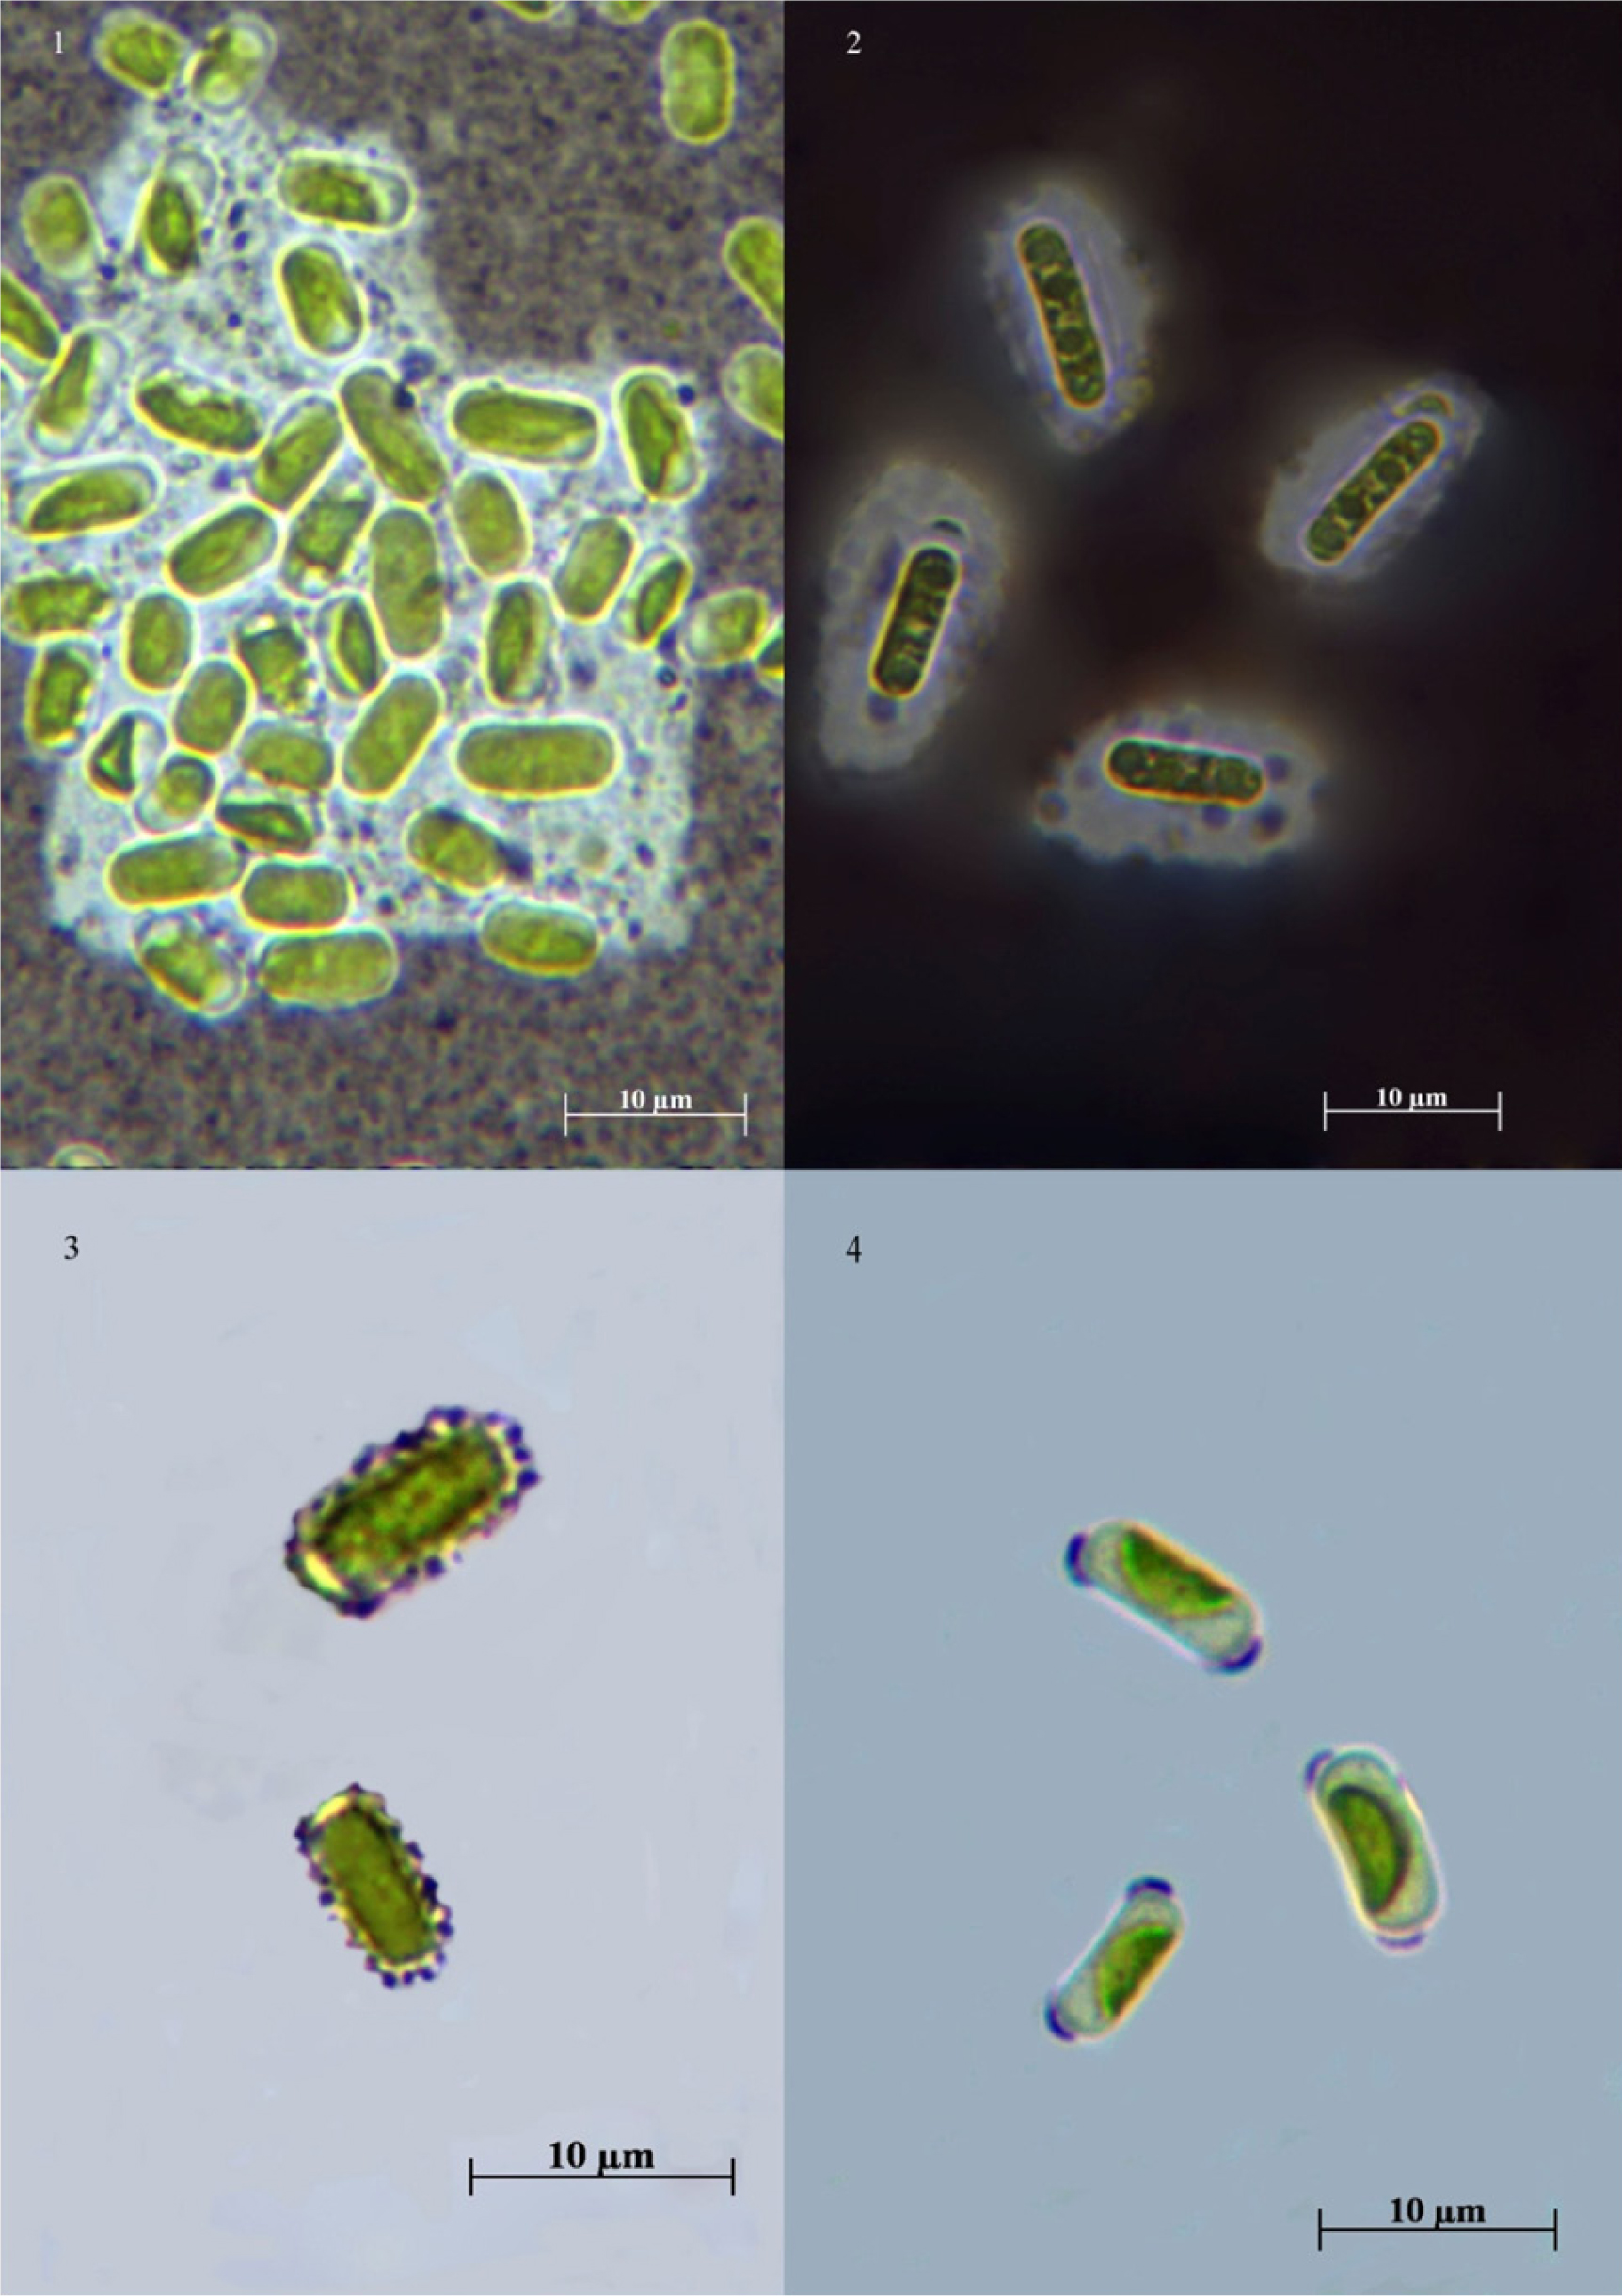 Fig. 1. Typical mucous structures of the members of genus Stichococcus. 1 – colonial mucilage (strain ACKU 868-09); 2 – mucous sheath (strain ACKU 380-04); 3 – mucous grains (strain ACKU 376-04); 4 – mucous caps (strain ACKU 864-09).